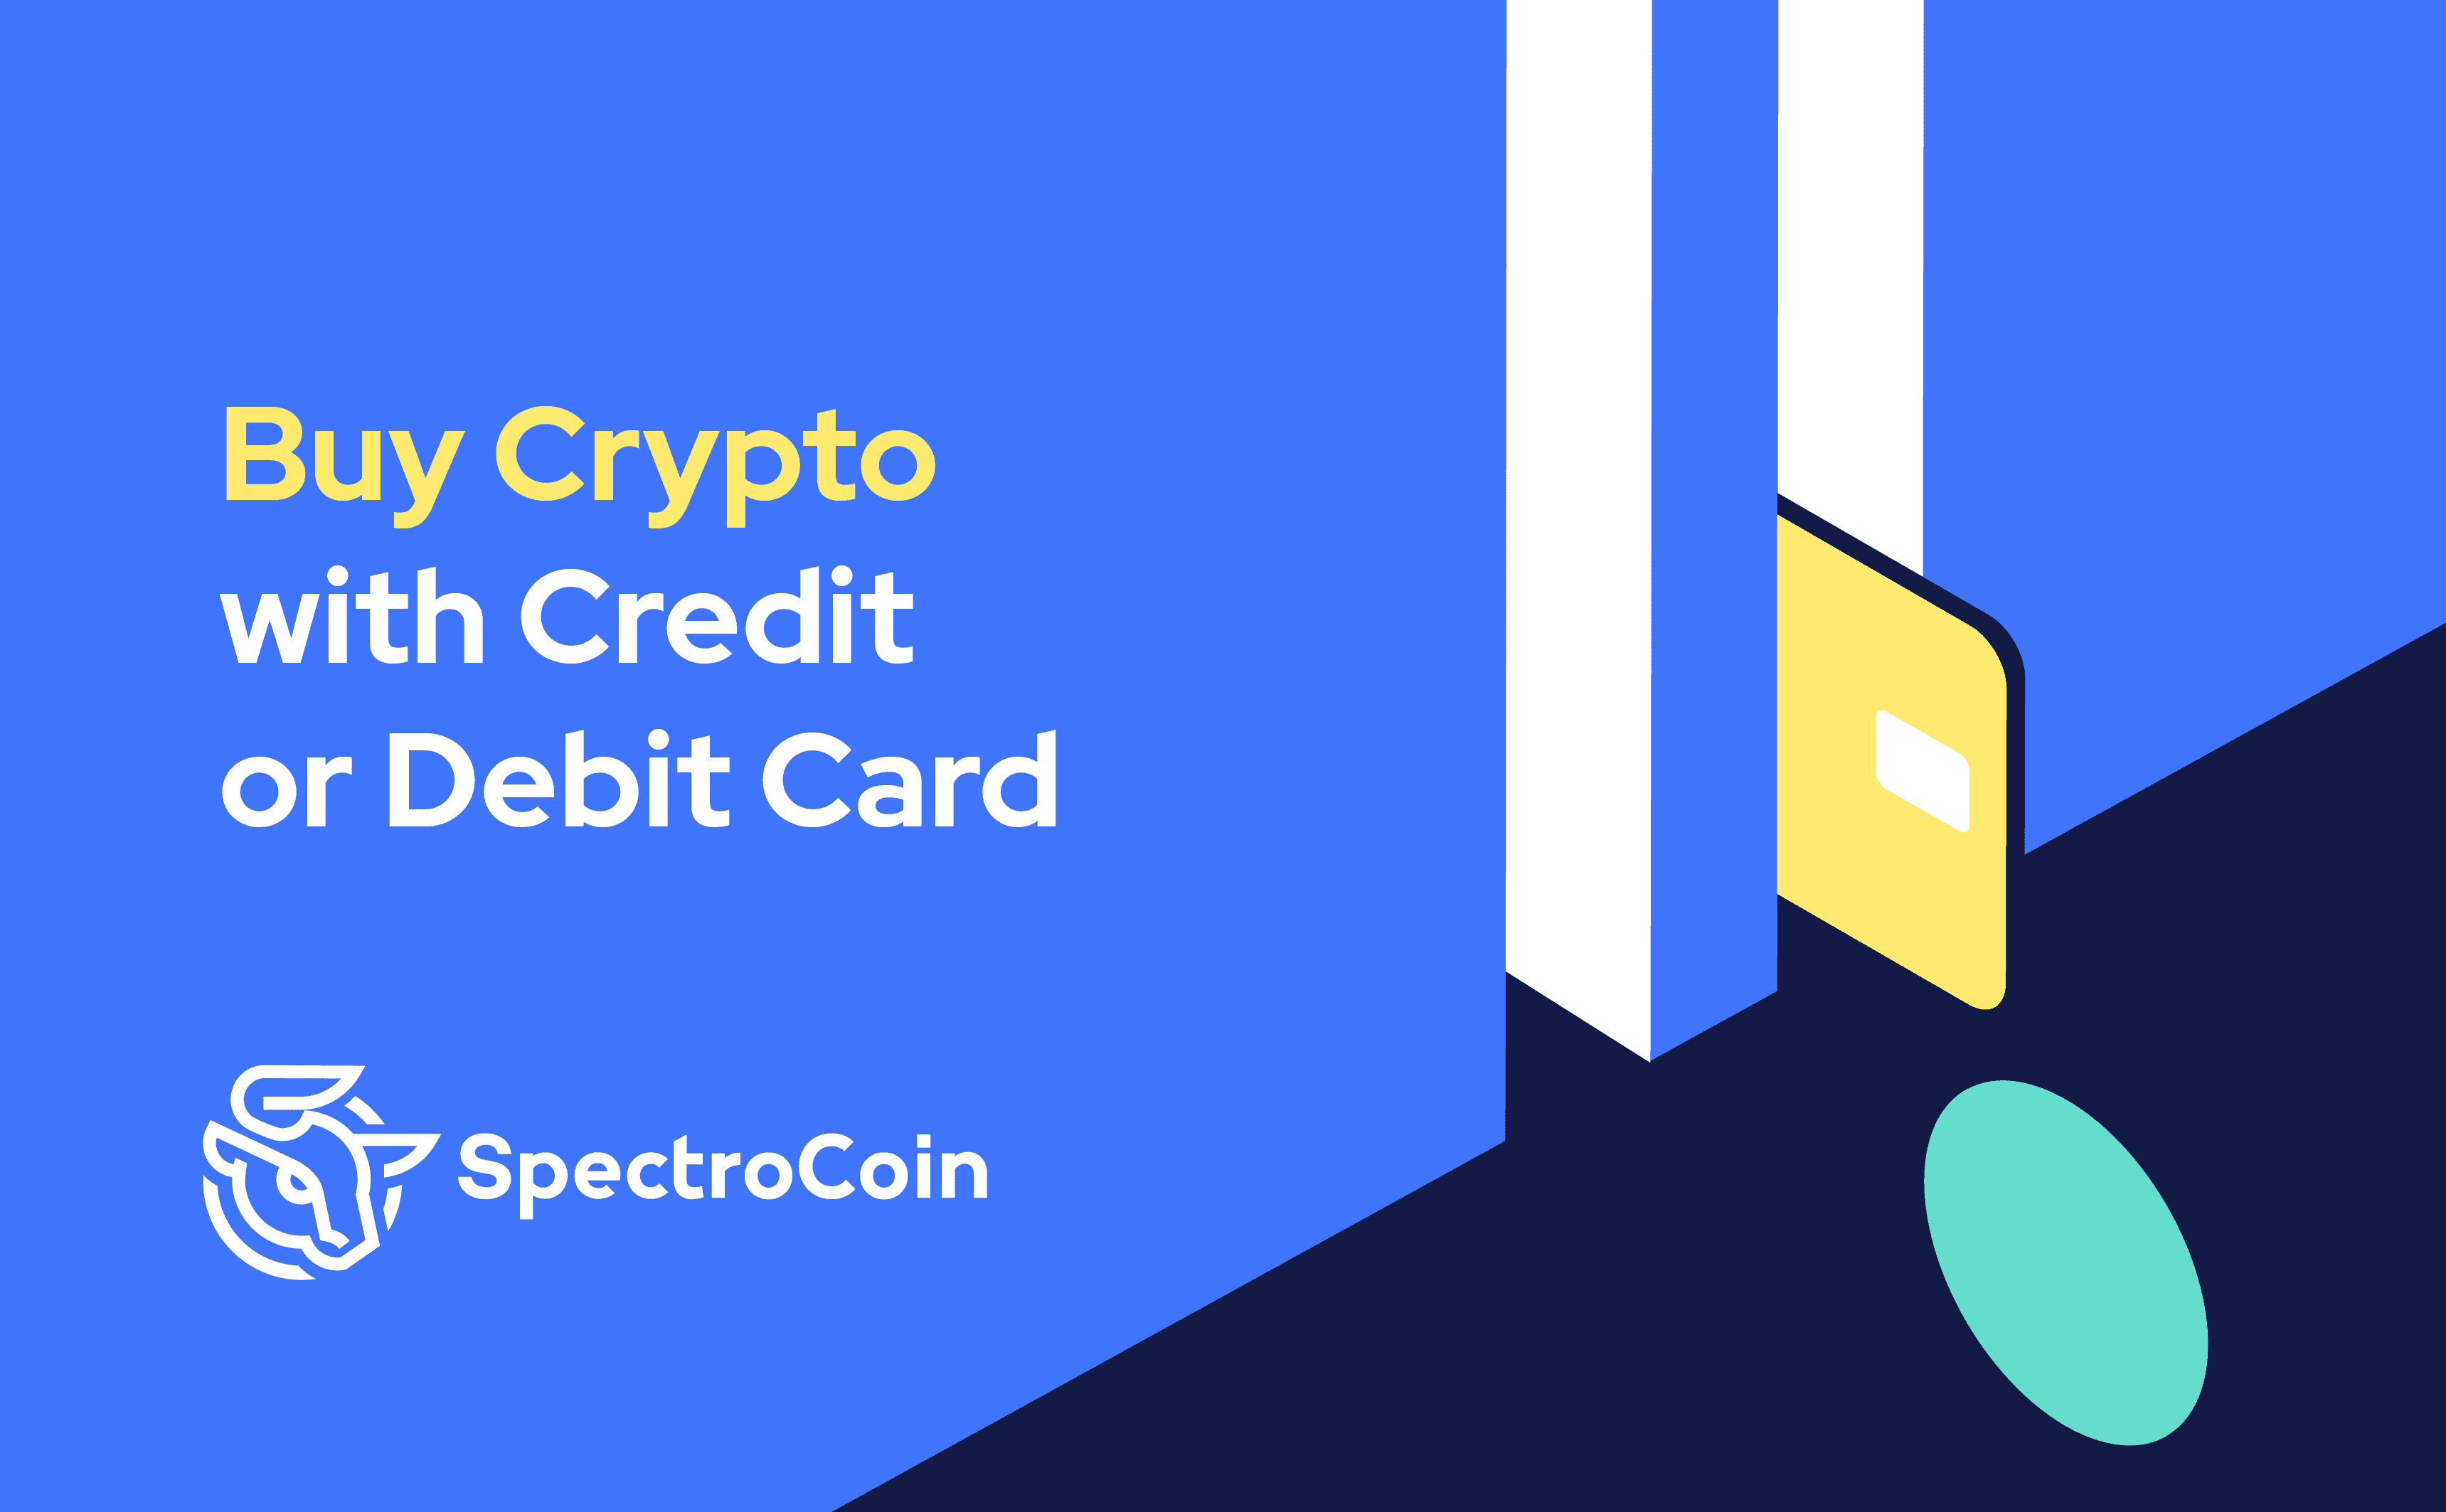 At SpectroCoin, users can buy crypto, such as Bitcoin, using their debit or credit cards.